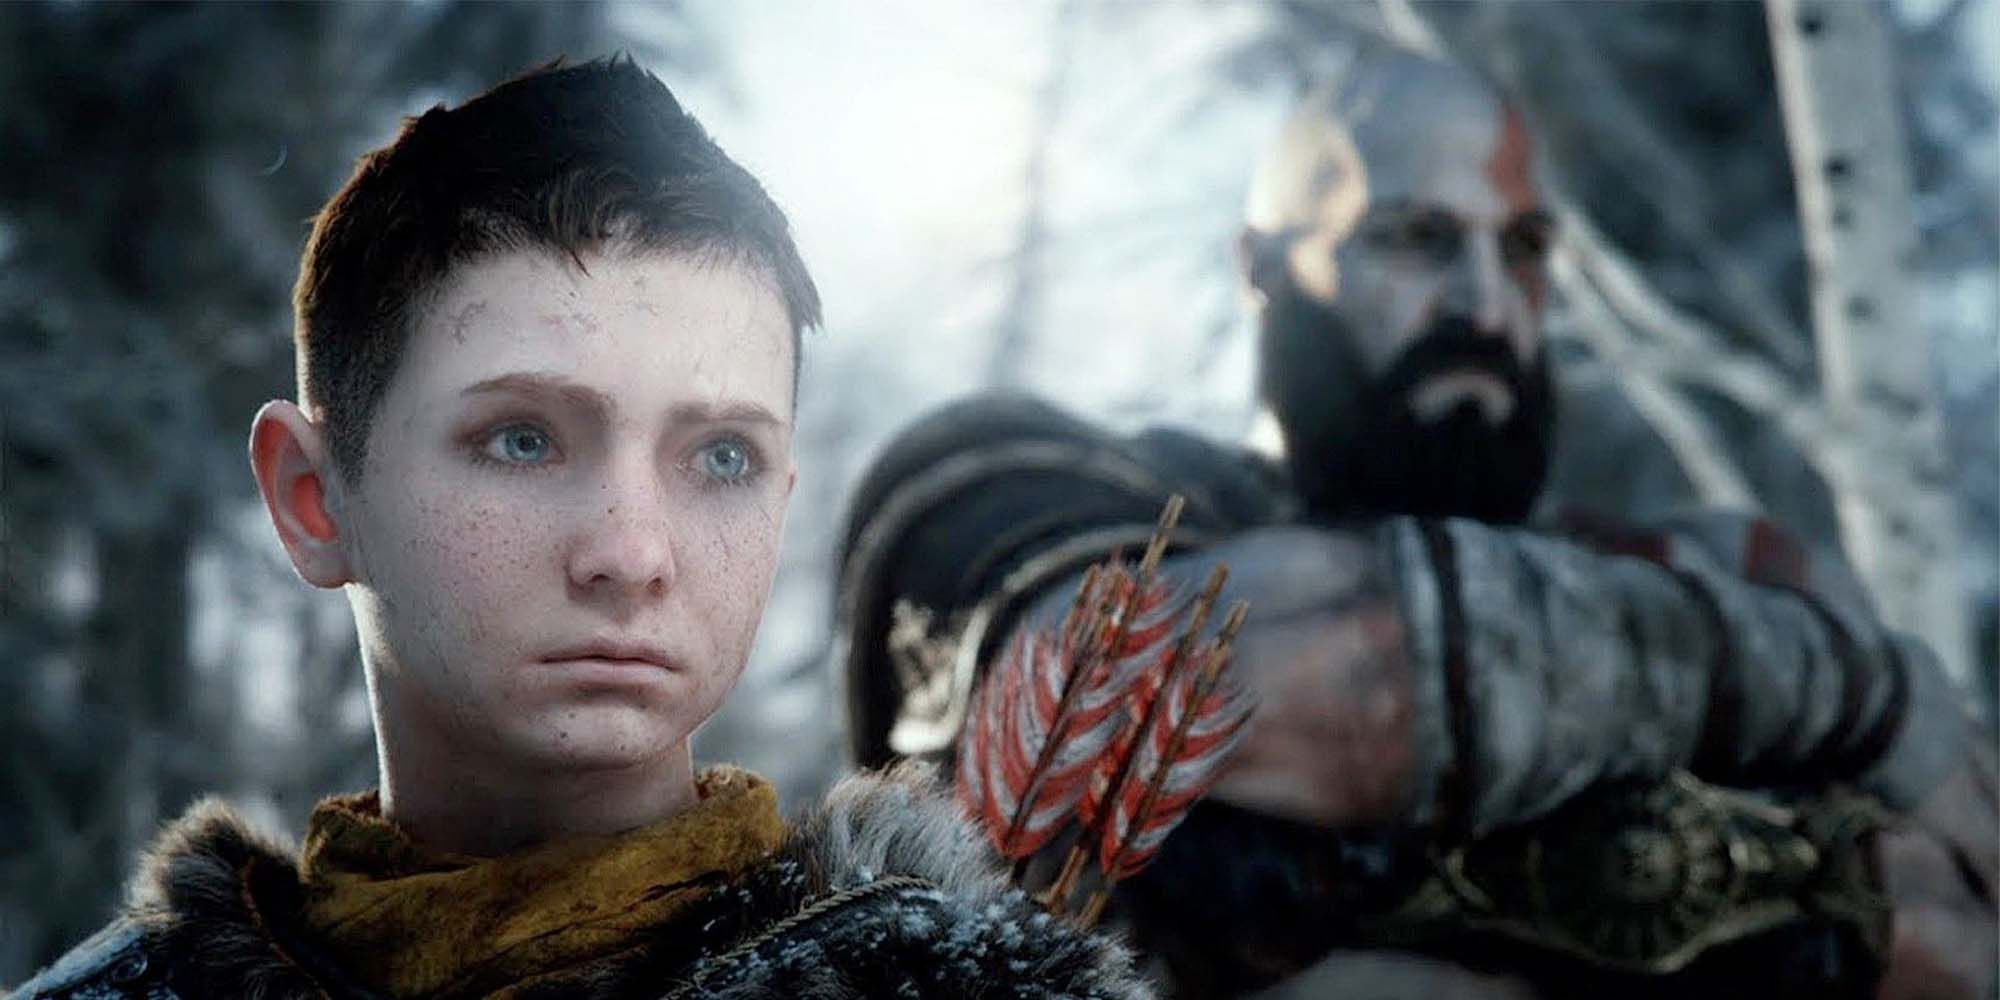 What powers will Atreus have as Loki in God of War 5? - Quora